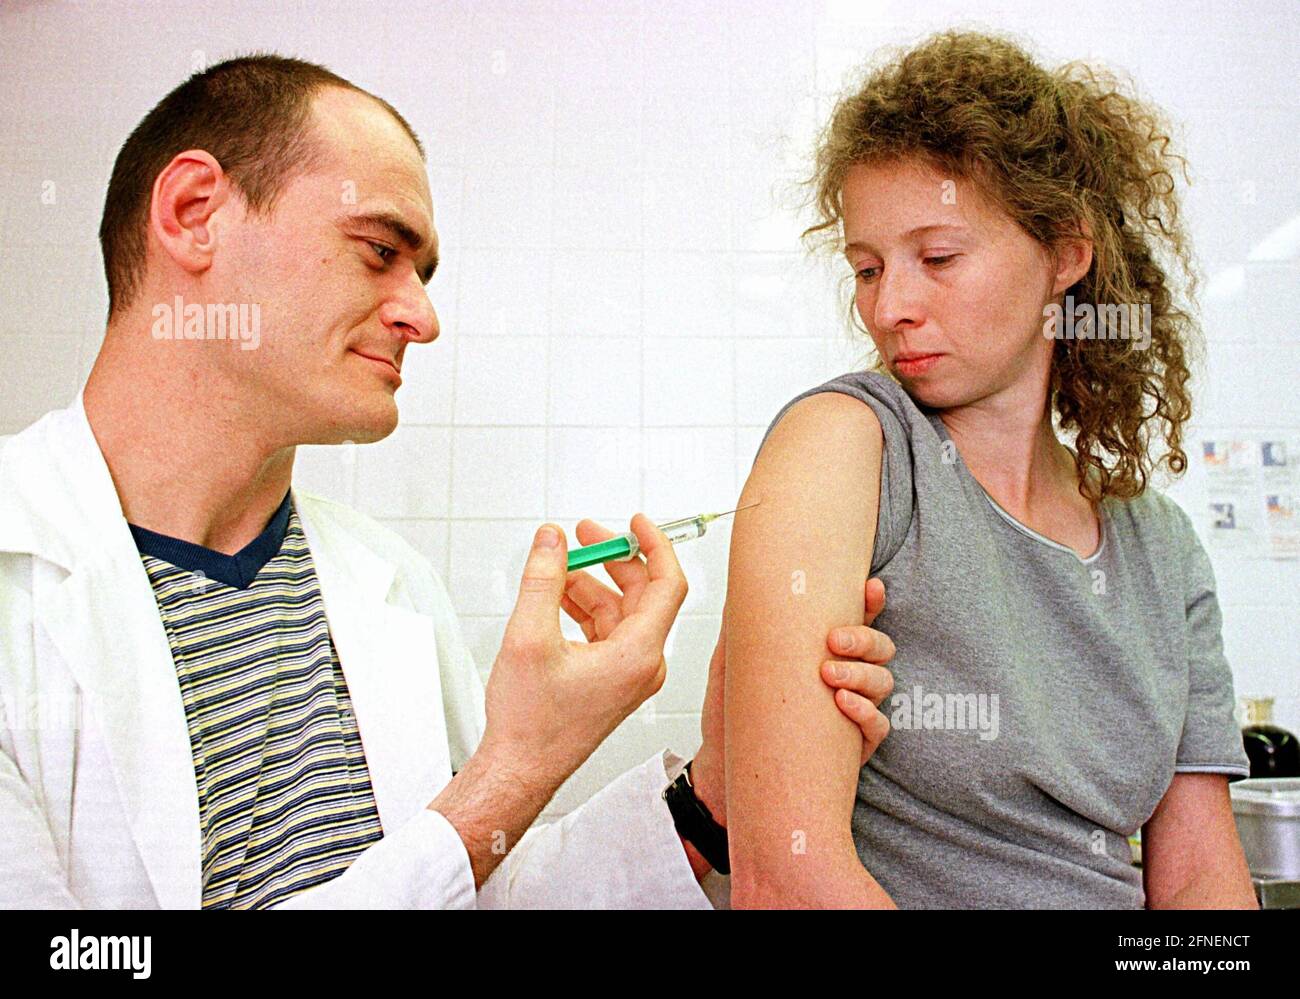 High time for the flu inoculation - frightened by the recent message over the dangers of new and possibly more dangerous flu viruses, the readiness for the preventive flu inoculation might have grown with many Federal citizens in the last weeks. Although this prophylactic measure by no means offers one hundred percent protection, it is nevertheless strongly recommended by numerous doctors, especially for risk groups. However, timing is also important here - the protective effect of the administered serum can only develop in the body about two weeks after the vaccination. (508 characters) Stock Photo